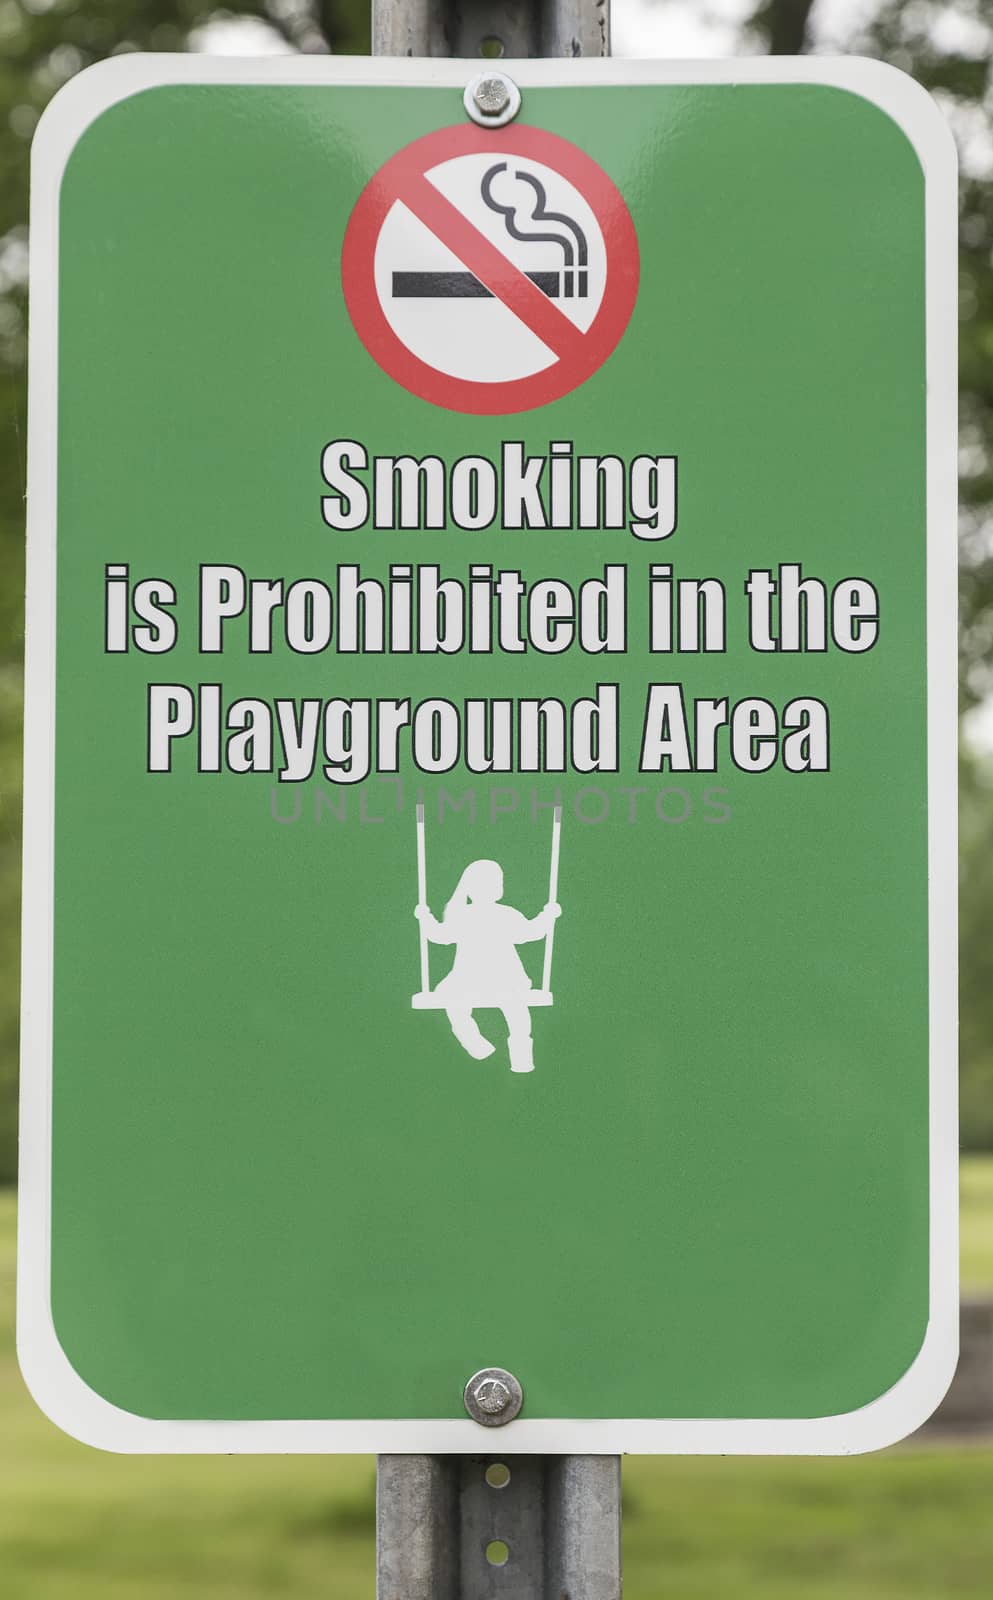 No smoking in the playground area sign. Icon of child swinging. 
